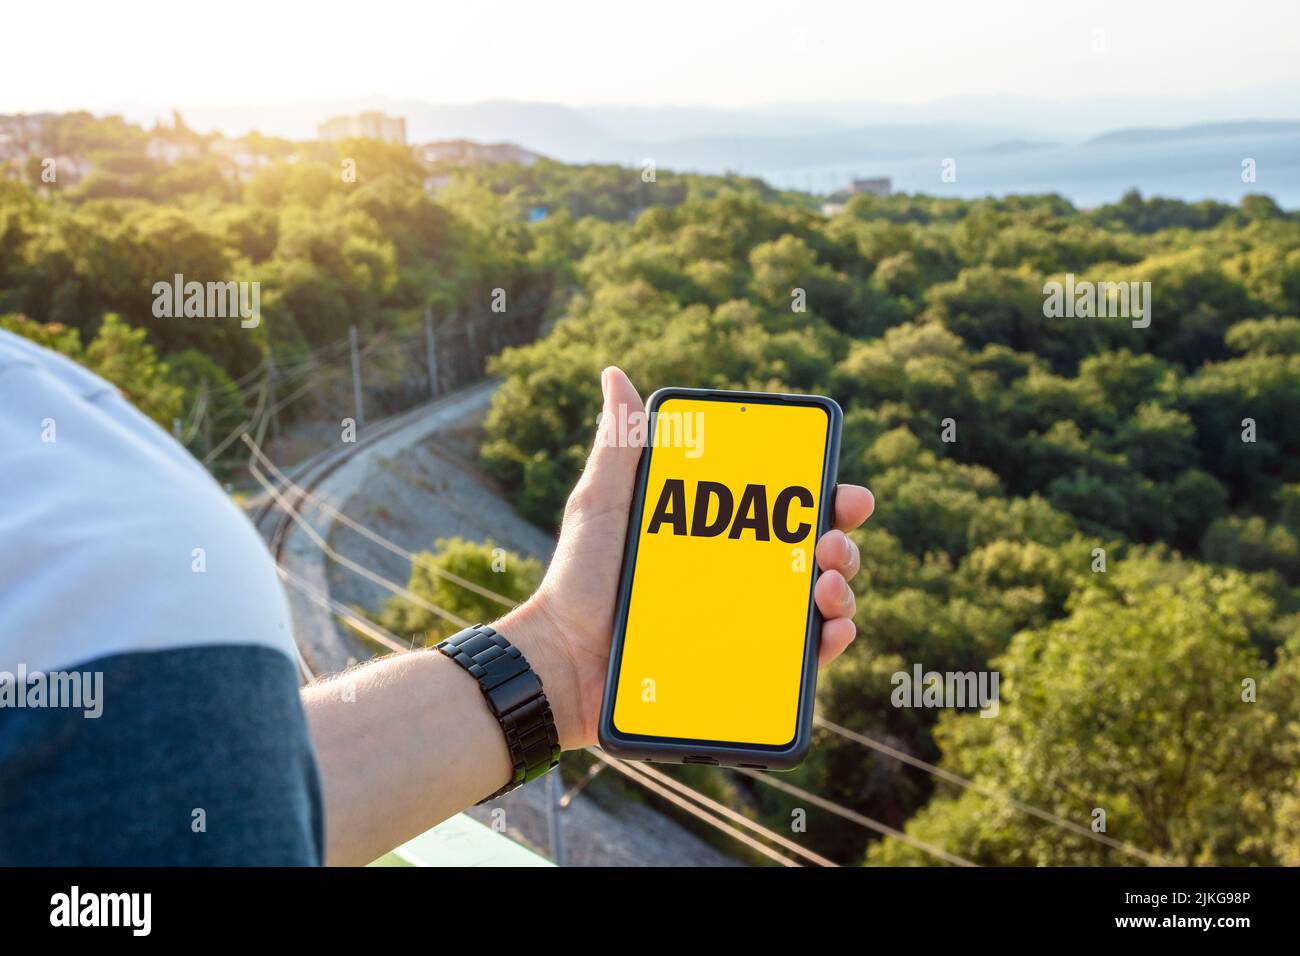 30 July 2022: Man Uses His Smartphone On A Trip And Shows The ADAC Der Allgemeine Deutsche Automobil Club E. V. App On The Screen, PHOTOMONTAGE Stock Photo